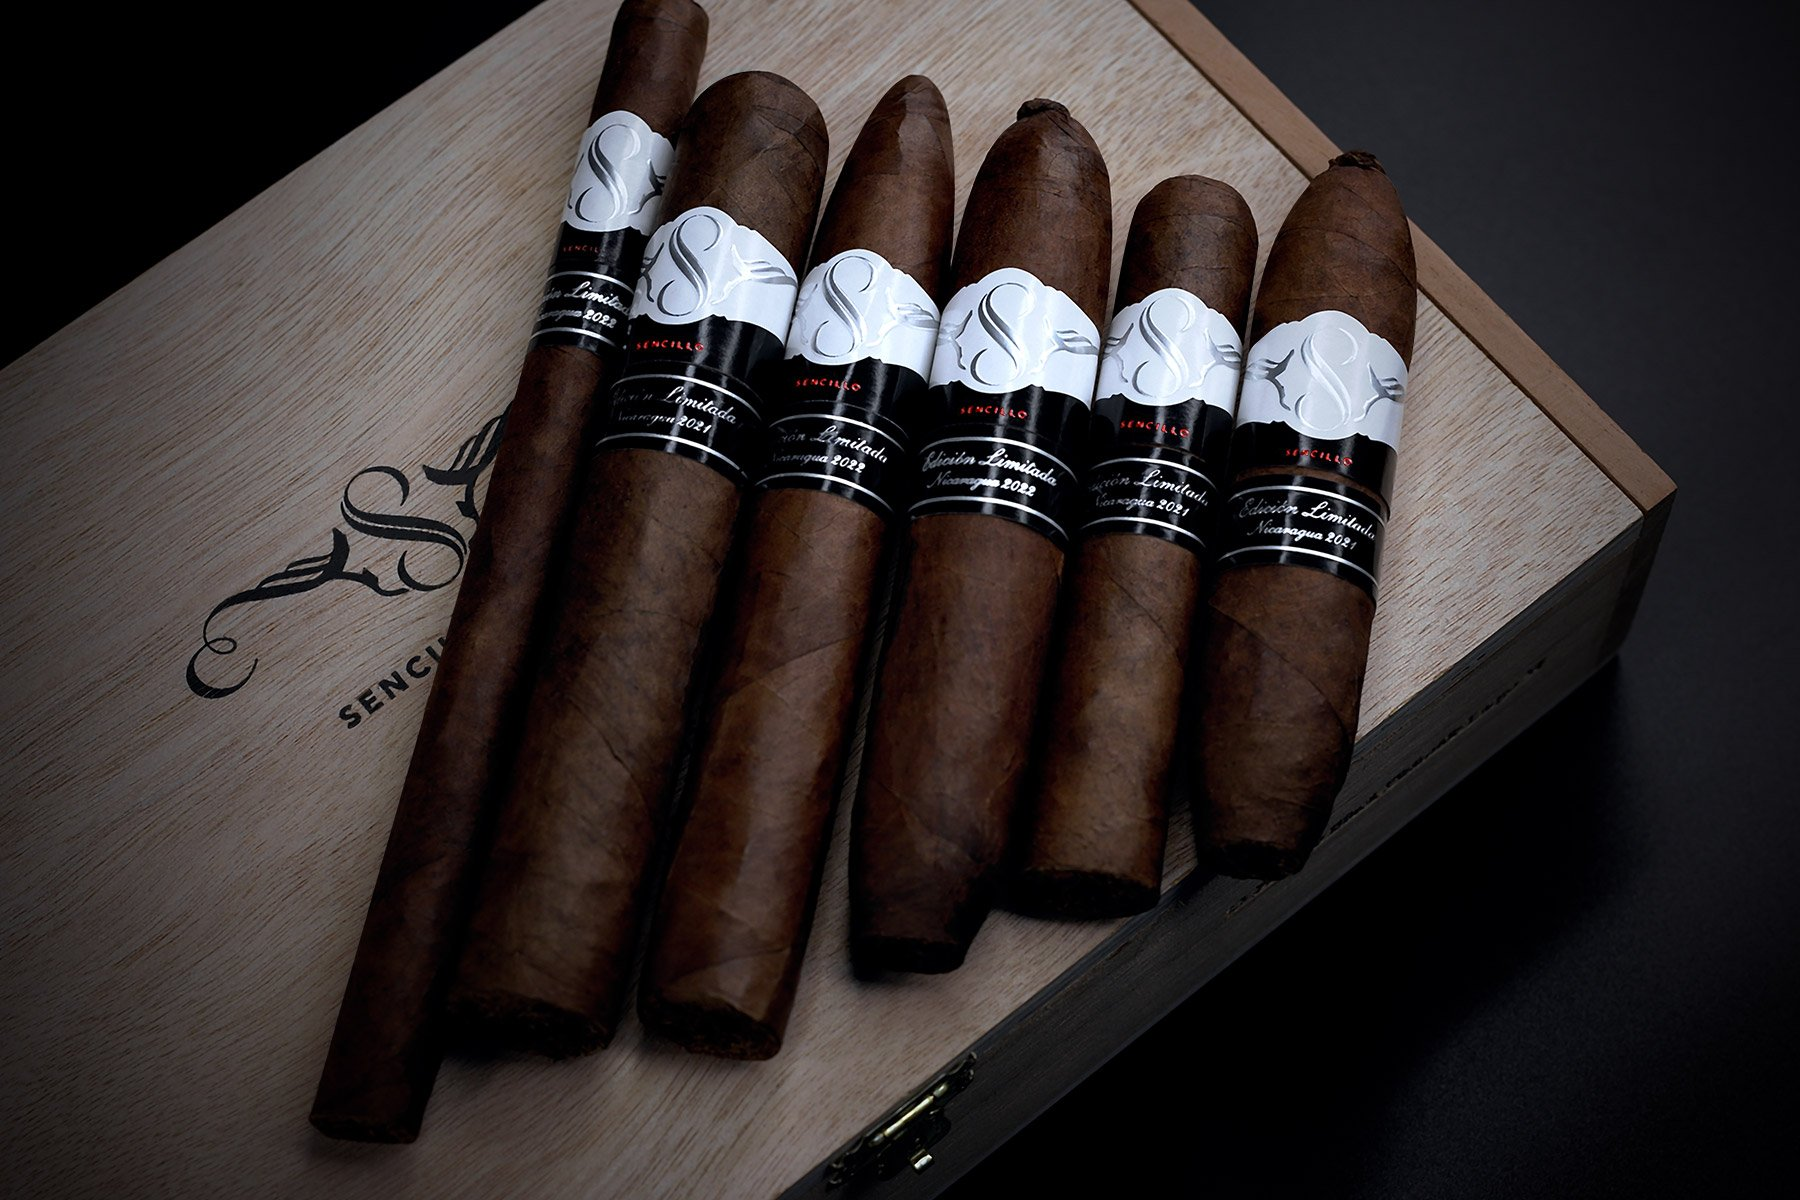 A Sencillo Black Robusto cigar, a twist on the Sencillo brand with a bountiful flavor that lingers and a slightly sweet undertone that tames the spicy flavor